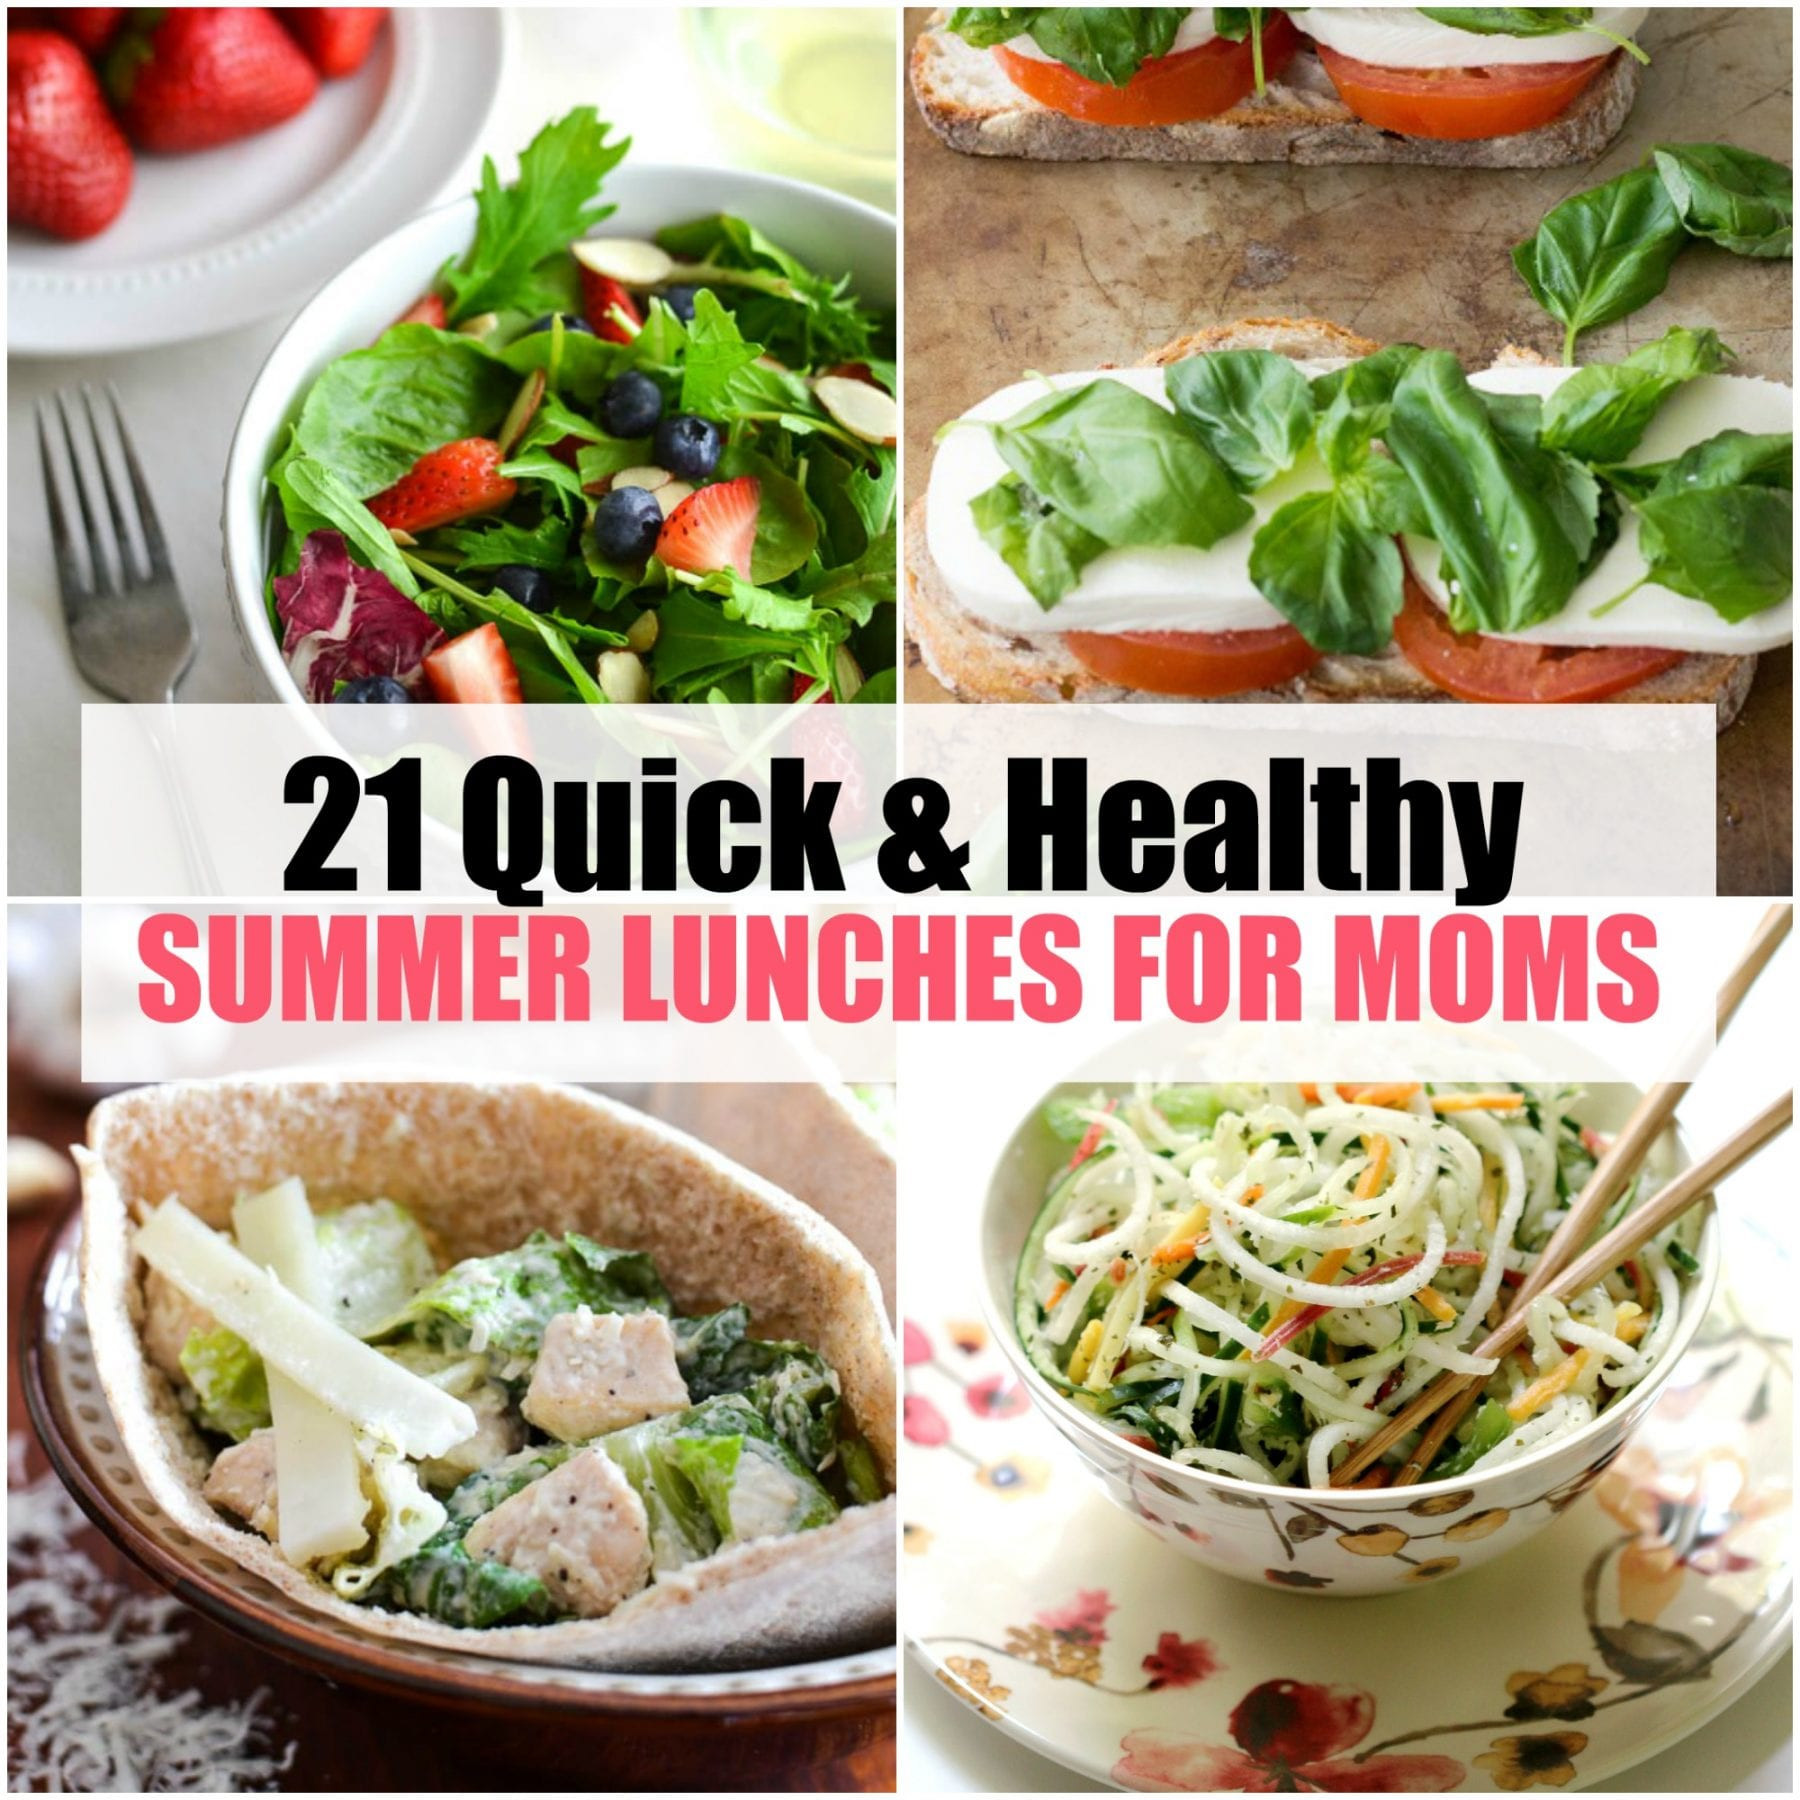 Healthy Summer Lunches
 21 Quick and Healthy Summer Lunches for Moms